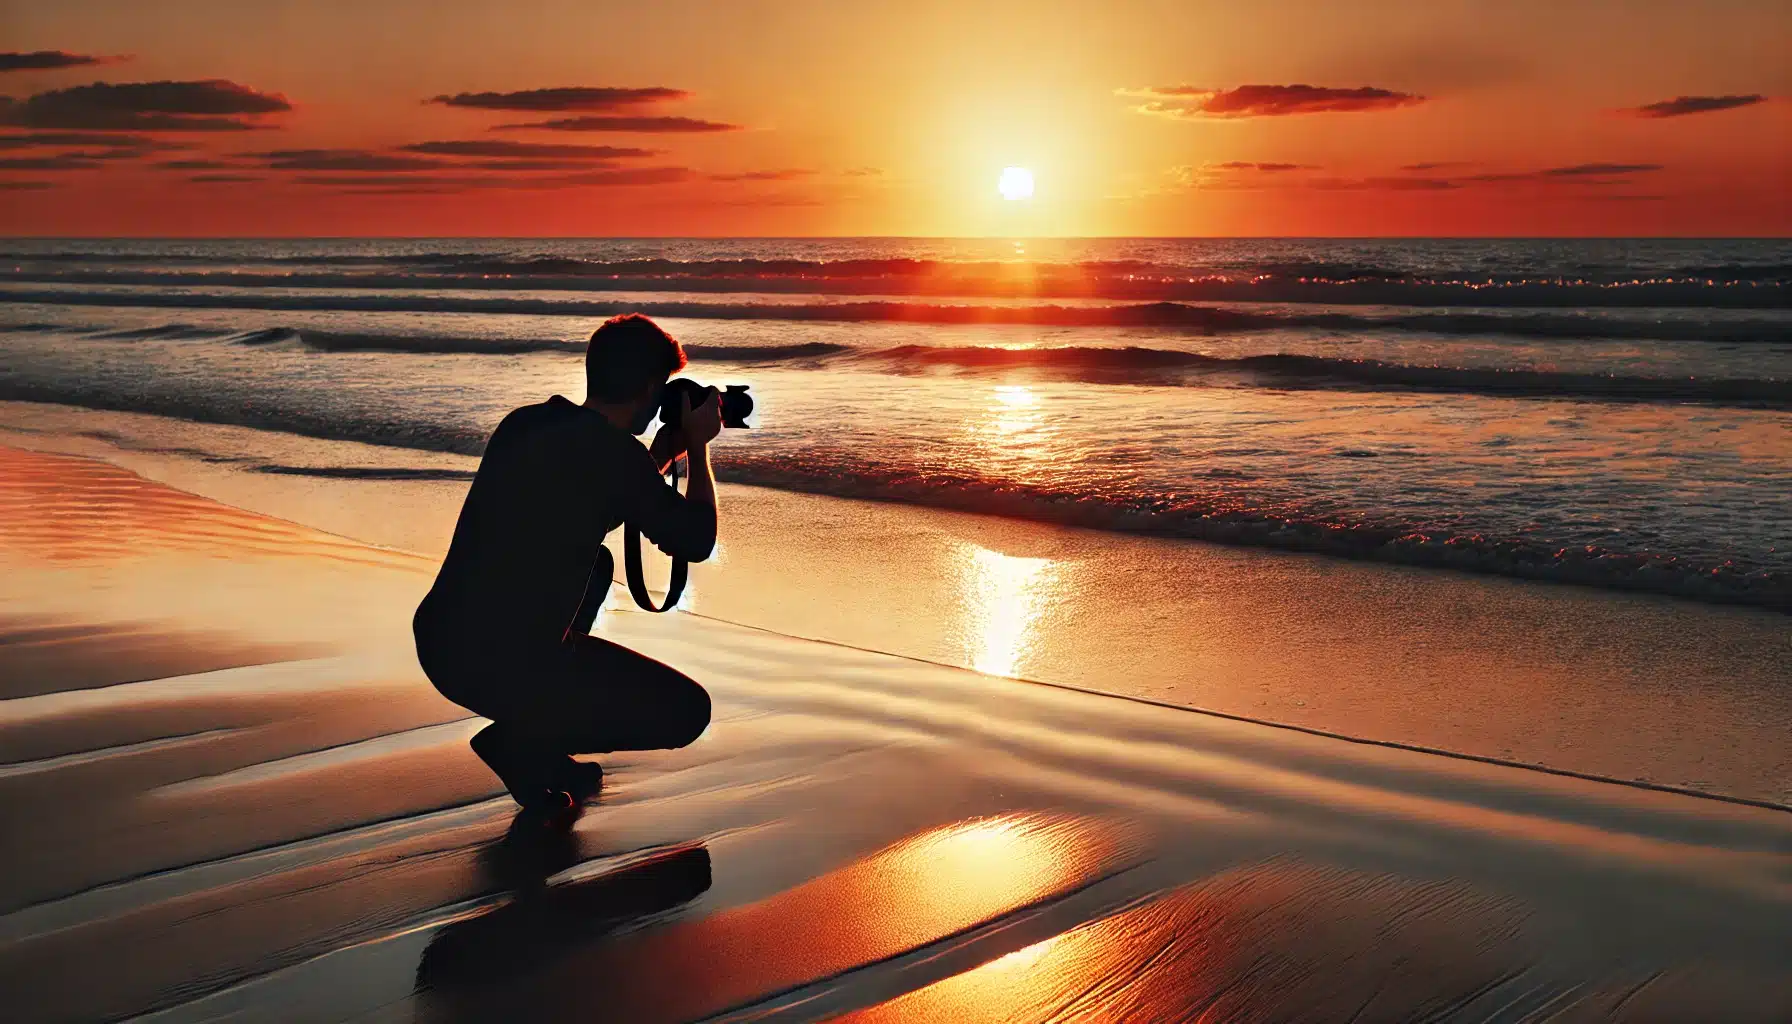 Photographer capturing a sunset at the beach using the rule of thirds.